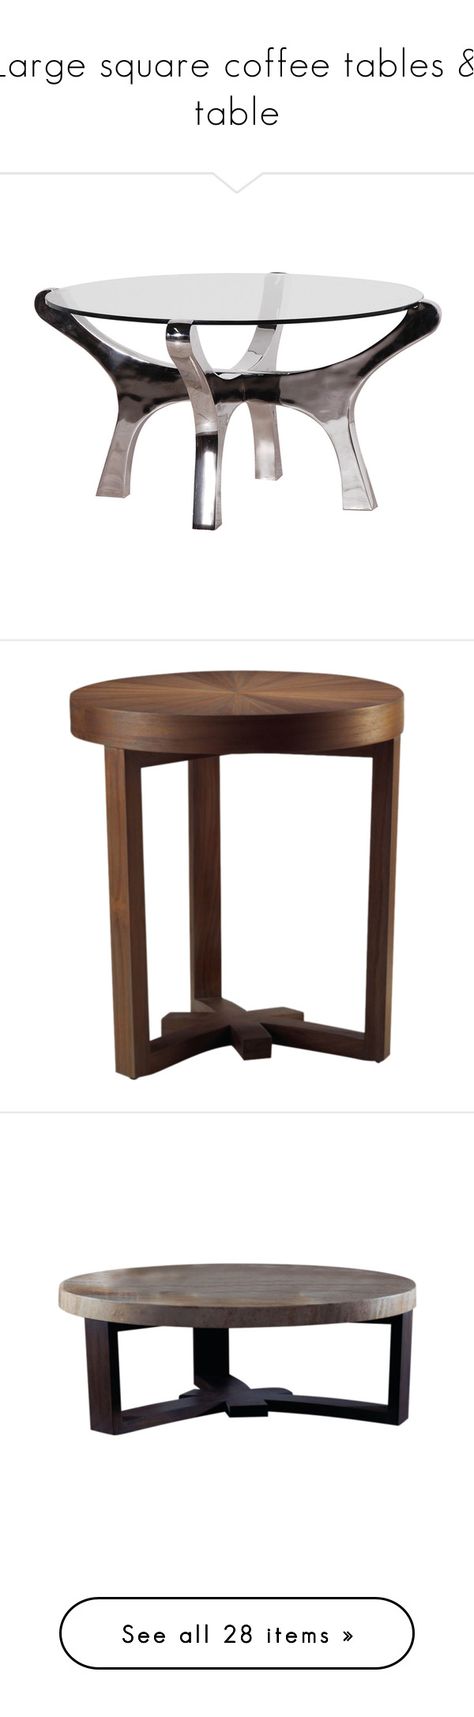 list accent table round metals tures metal accents glynn large square coffee tables suelb liked polyvore featuring home pottery barn end reclaimed wooden side marble top ikea